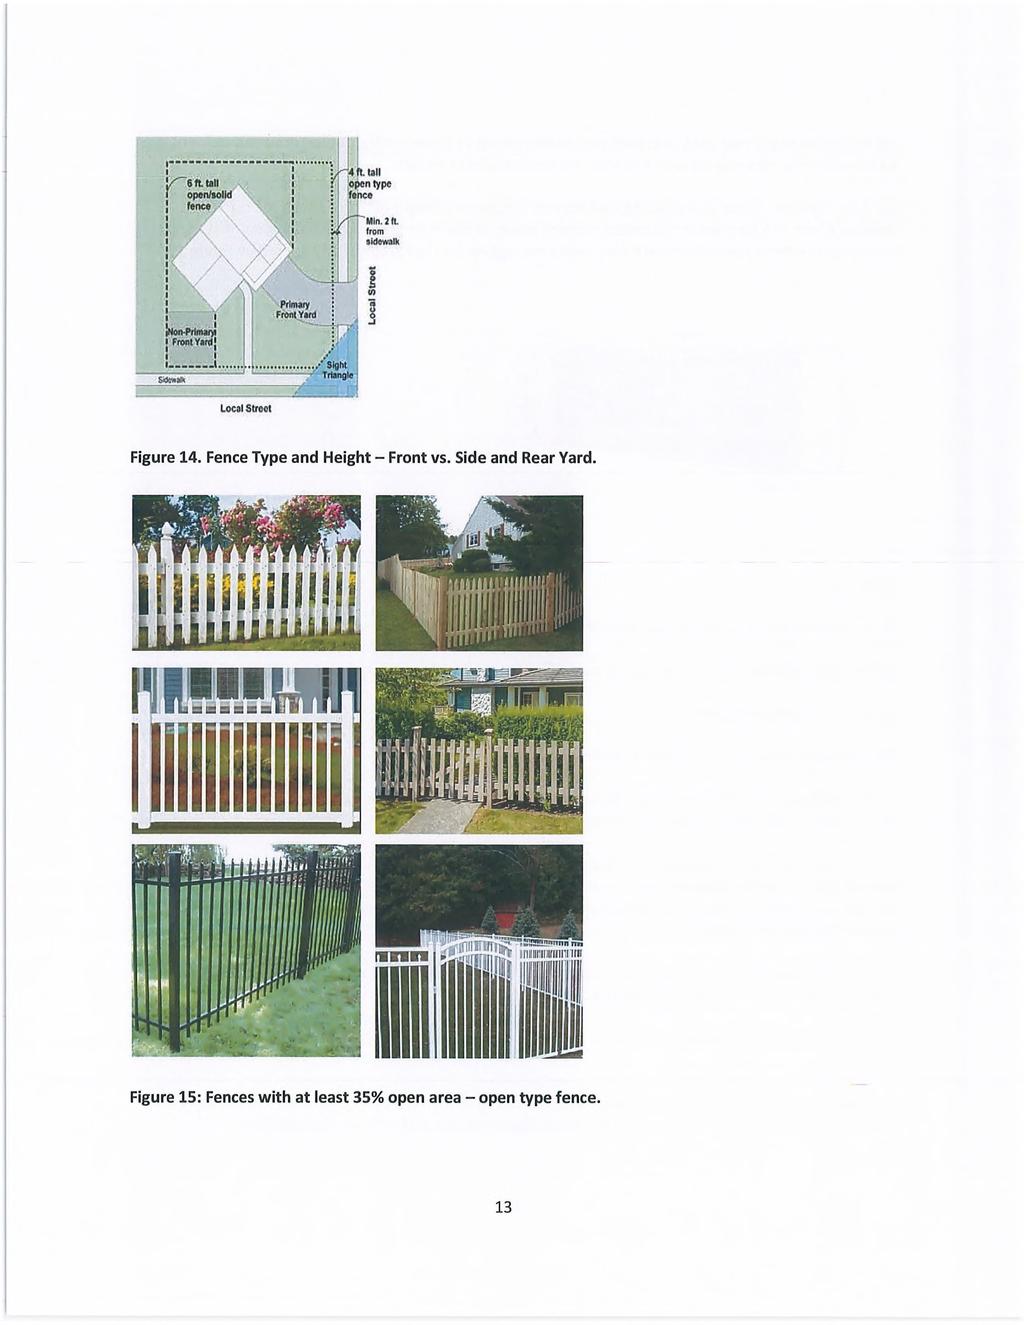 4(1. tall!&* from sidewalk </> 1 8 Me*m Local Street? Figure 14. Fence Type and Height - Front vs. Side and Rear Yard.